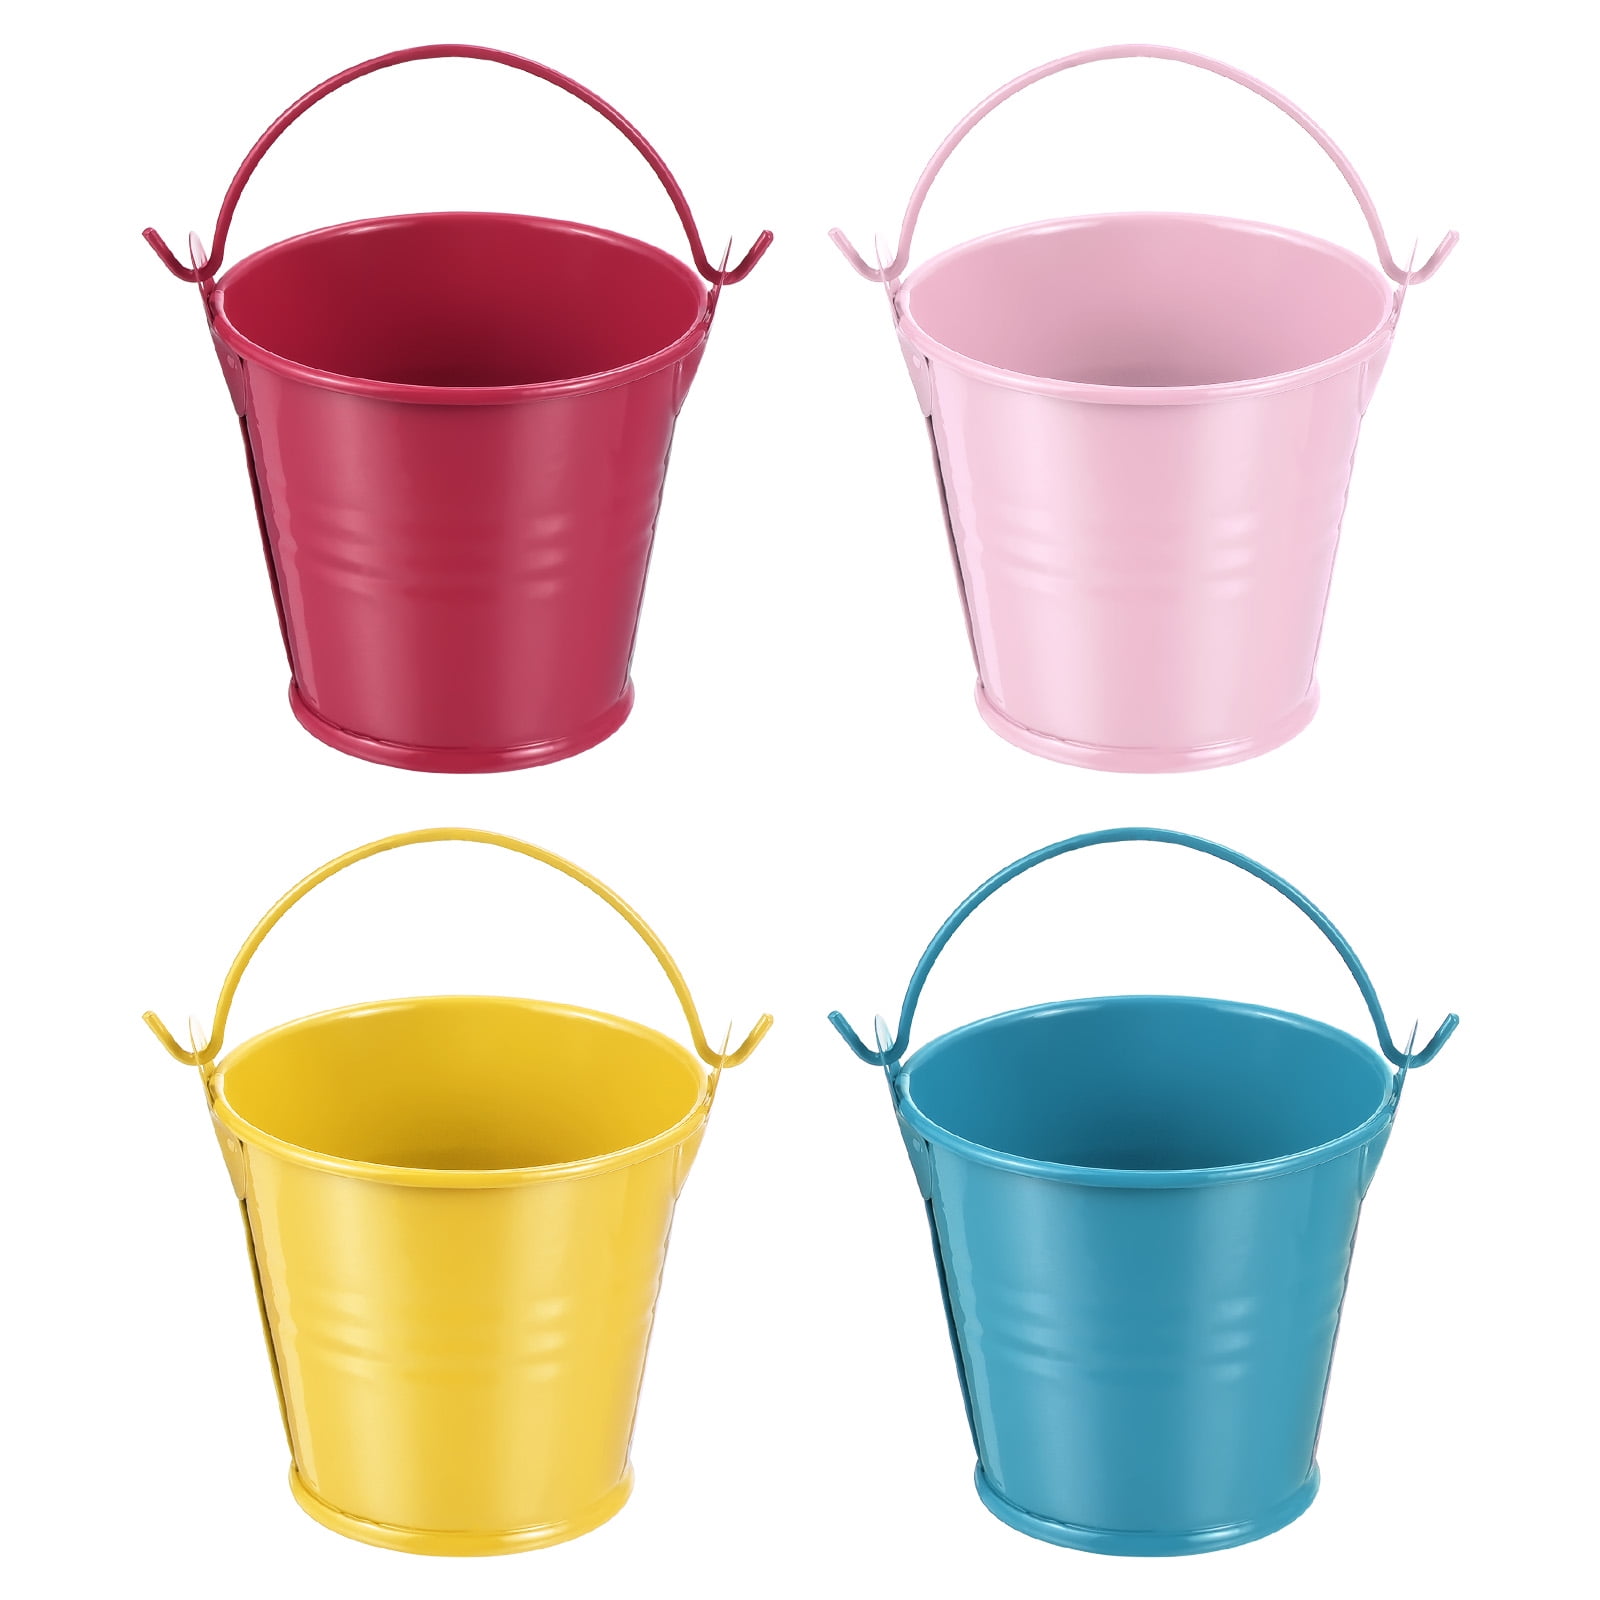  6 Pcs Small Metal Bucket with Handle Pencil Buckets with 20  Sharp and Dull Stickers Assorted Colored Tin Bucket Mini Buckets Colorful  Tin Pail Containers or Back to School Teachers Classroom